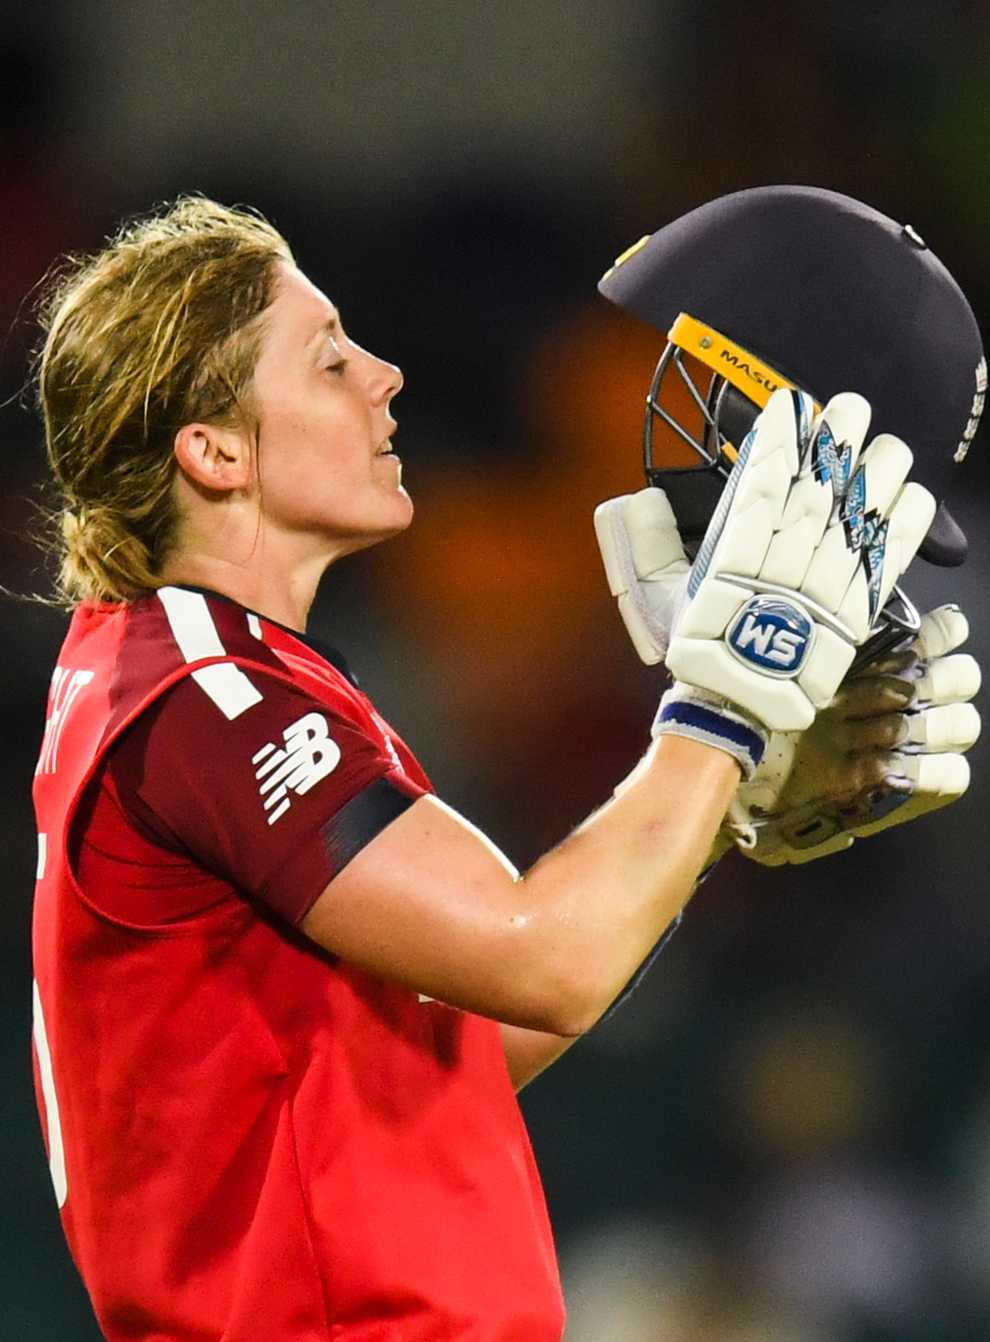 England will play the first of five T20s against the Windies on Monday